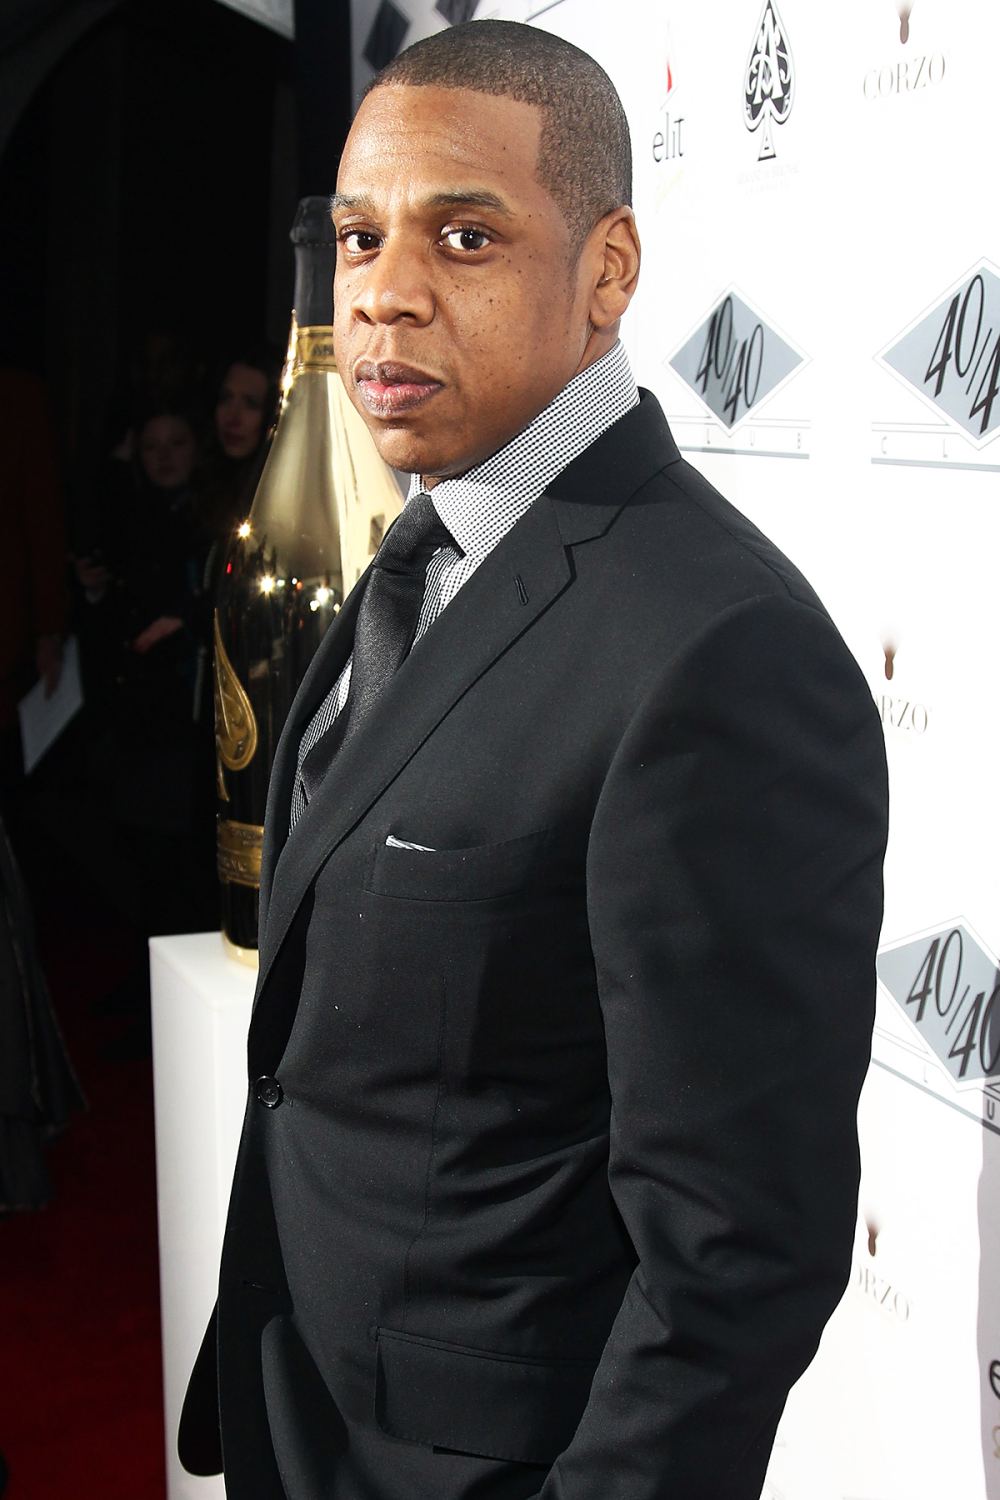 Jay-Z attends the grand re-opening of his 40/40 Club on January 18, 2012 in New York City.